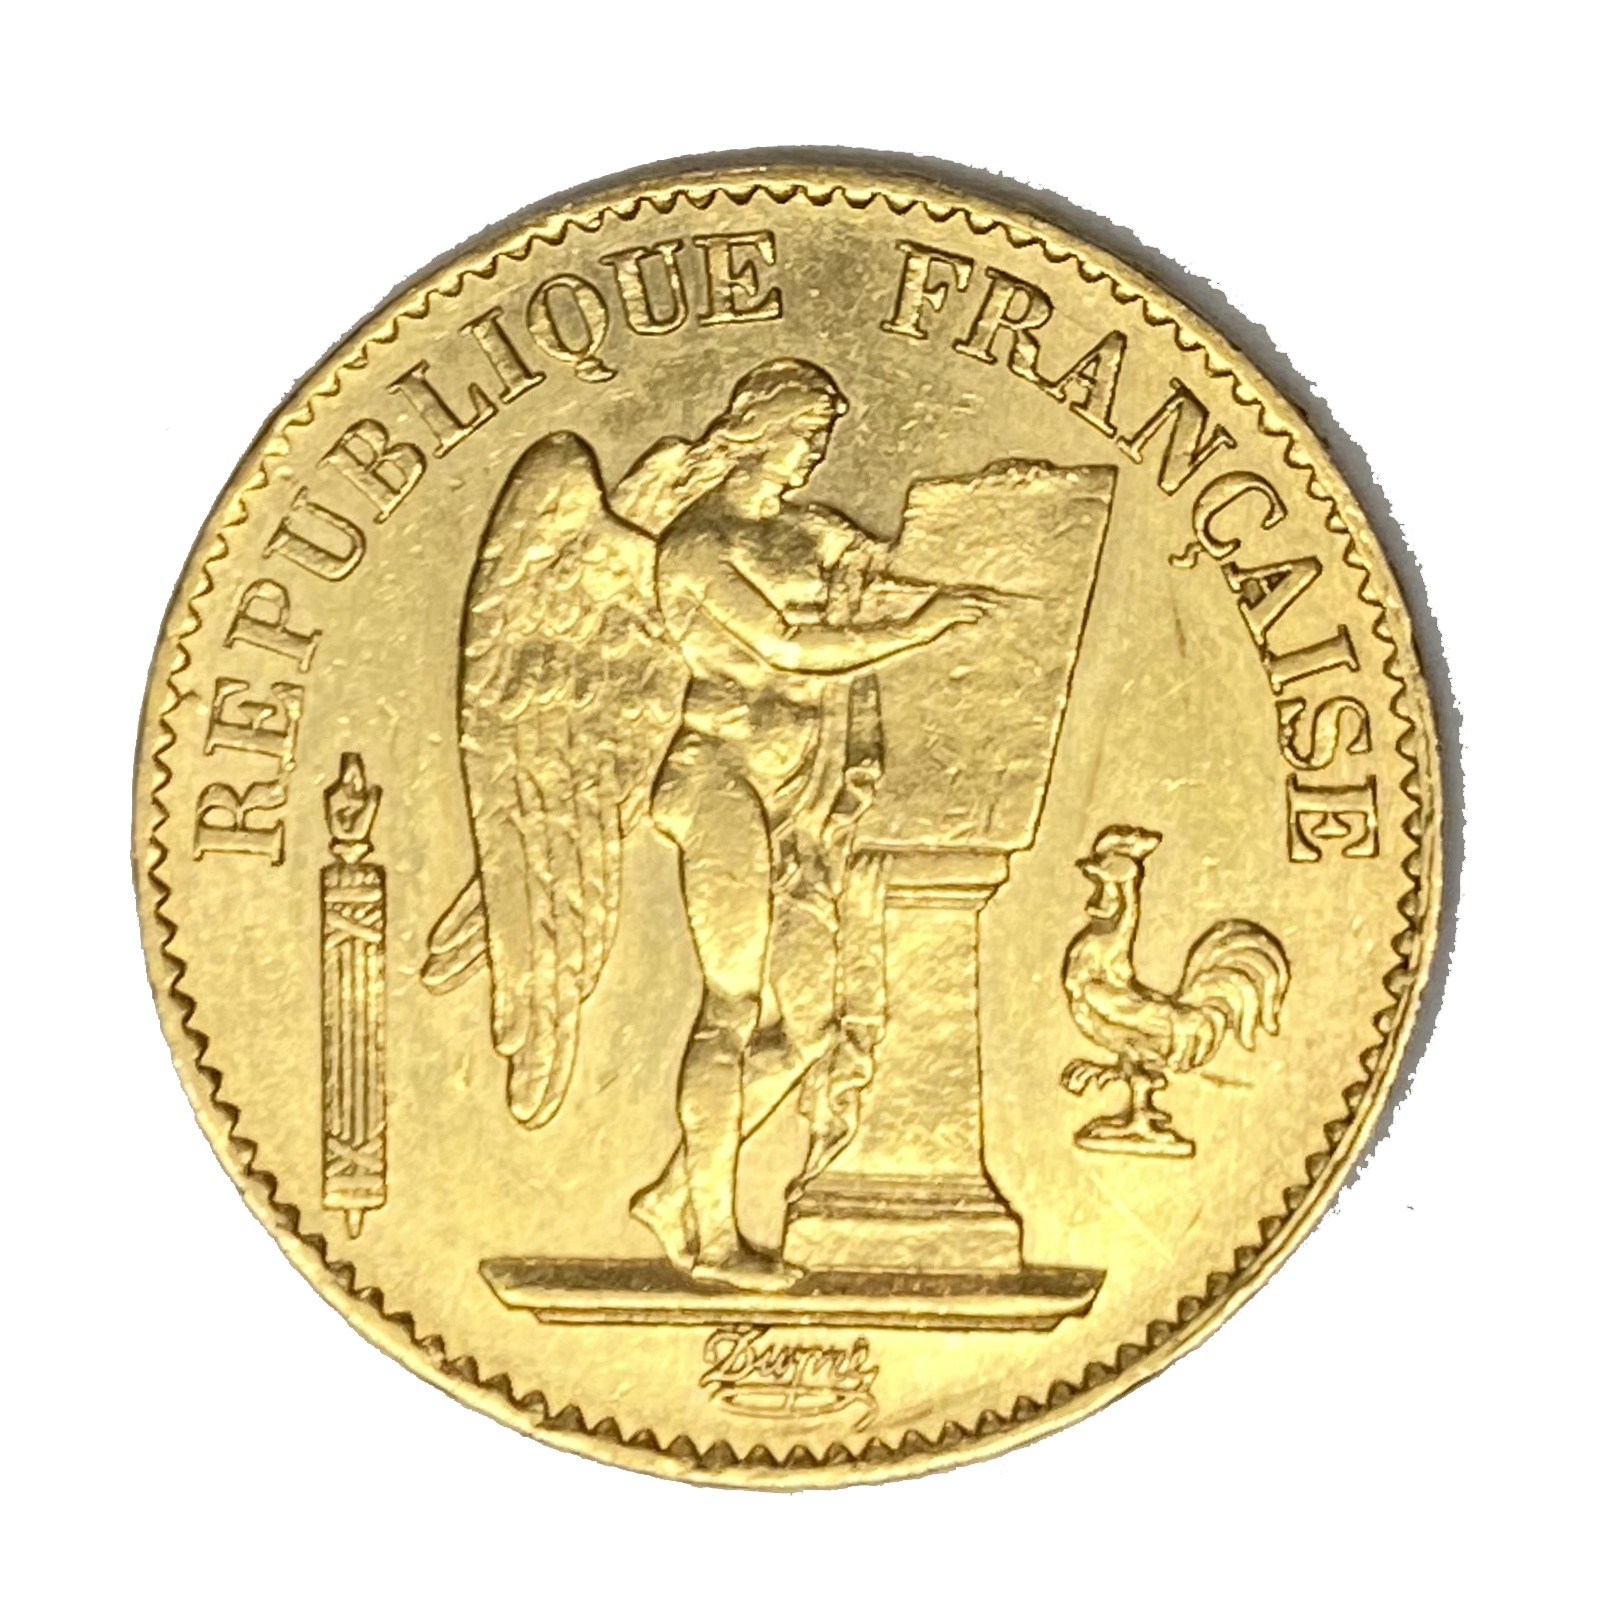 French Republic 20 Franc gold coin, 1875